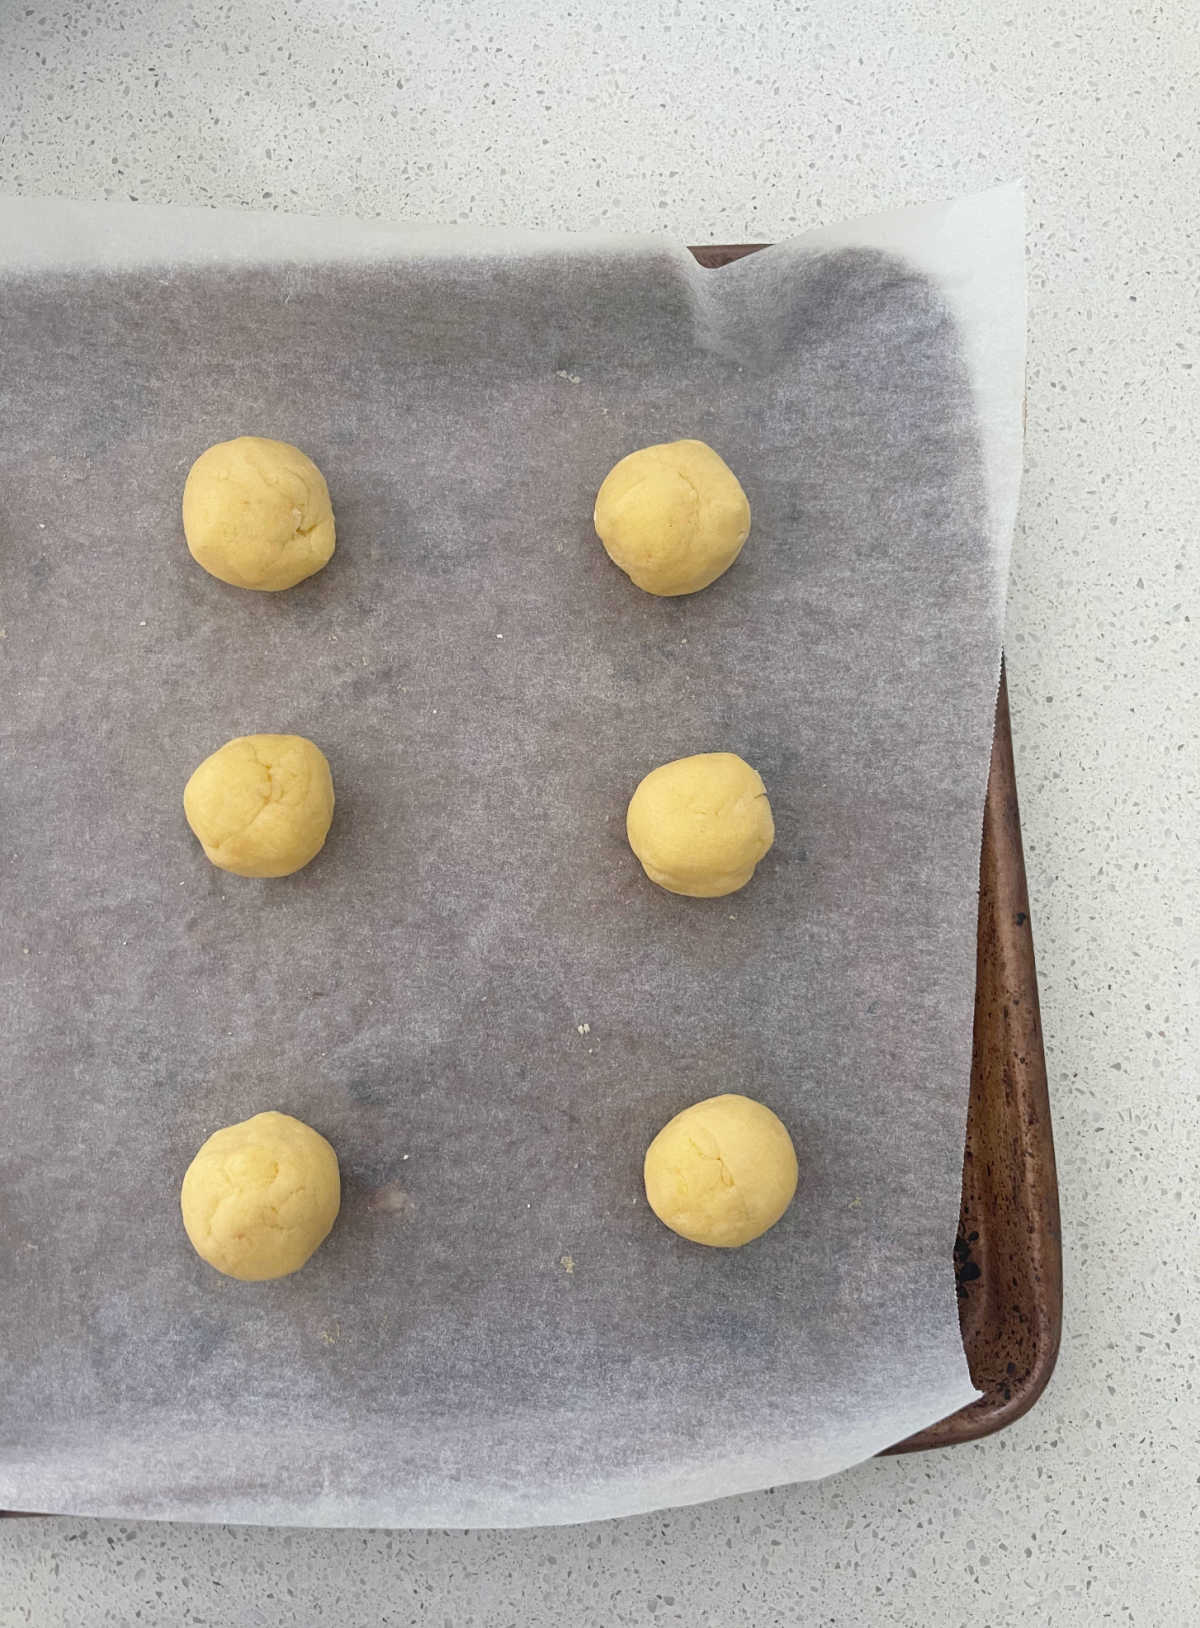 Thermomix Christmas Biscuit dough on baking tray.